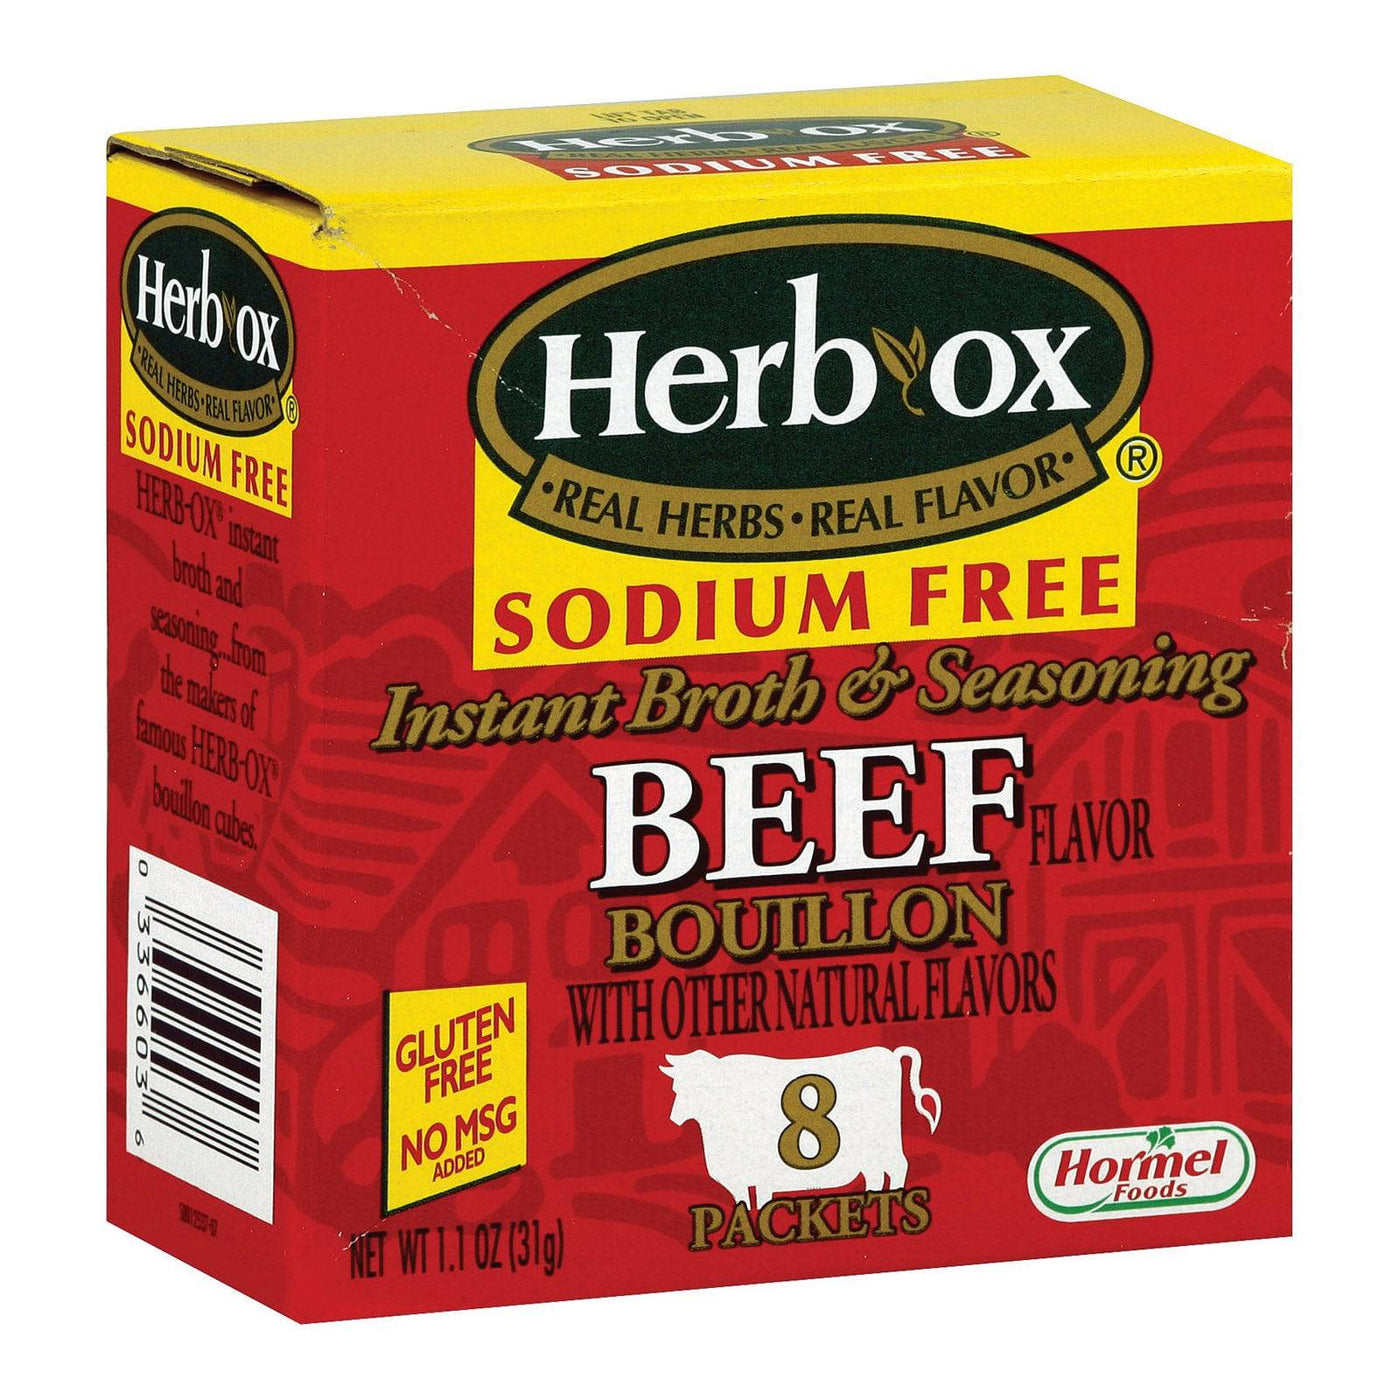 Buy Herb-ox Boullion - Beef - Low Sodium - Case Of 12 - 8 Count  at OnlyNaturals.us